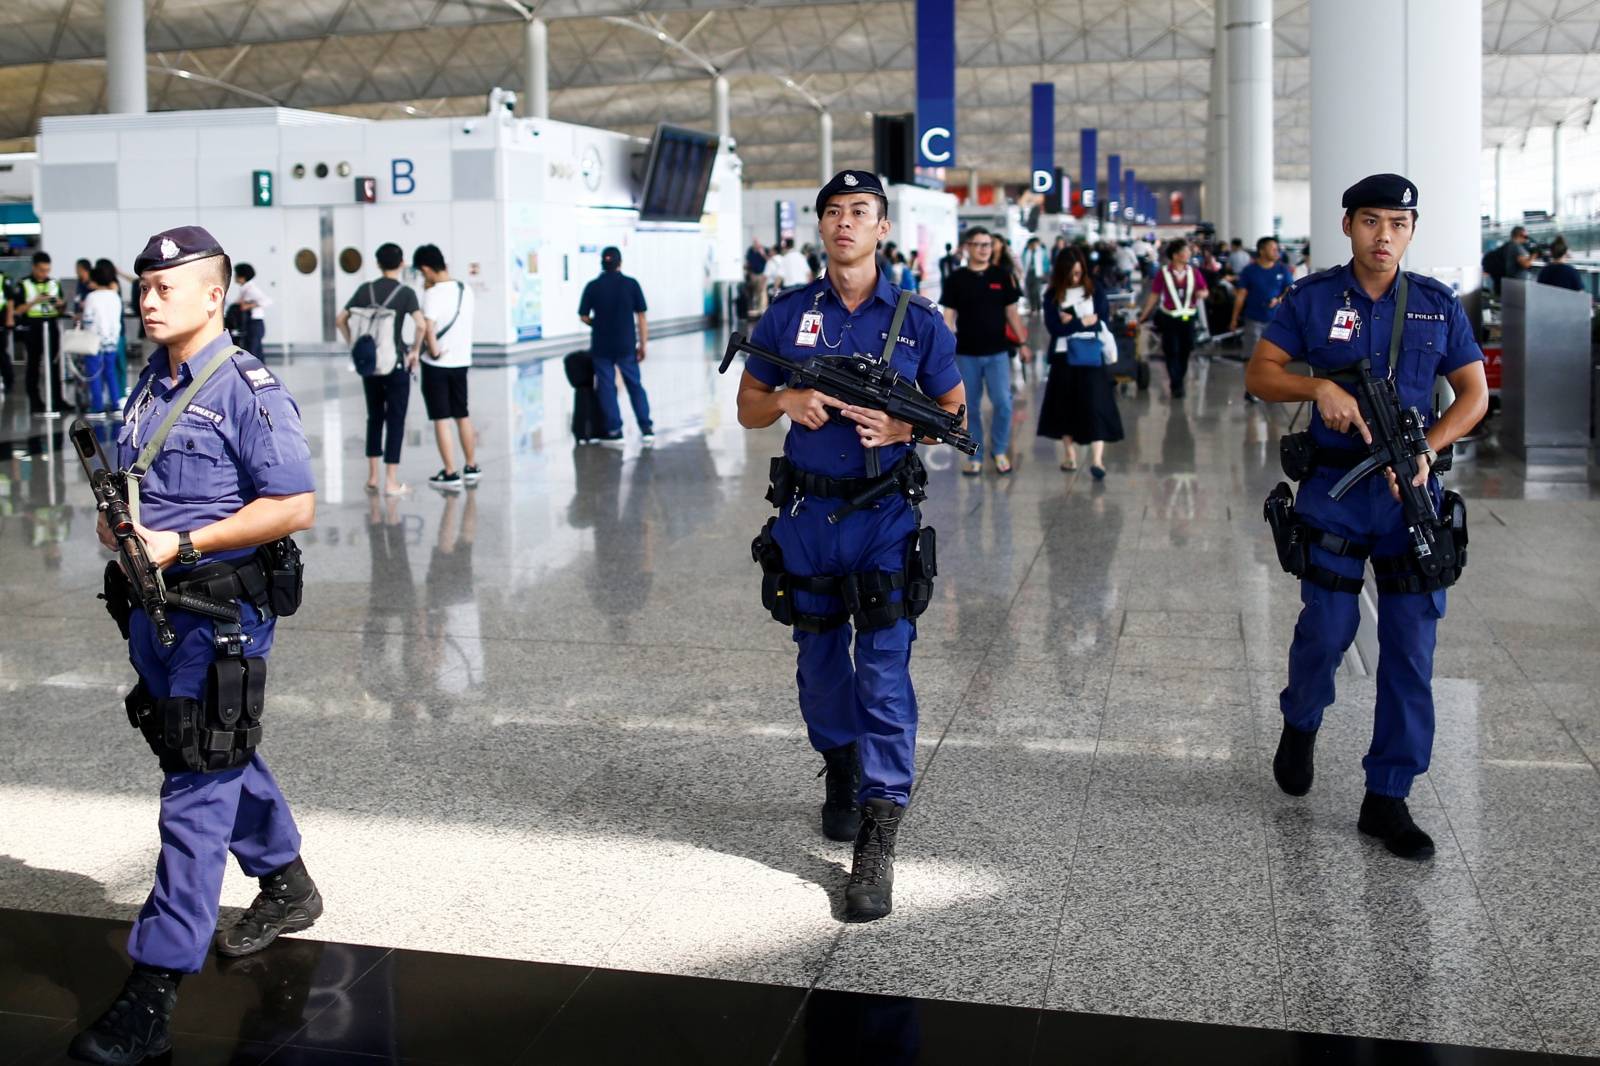 Armed police patrol the departure hall of the airport in Hong Kong after previous night's clashes with protesters